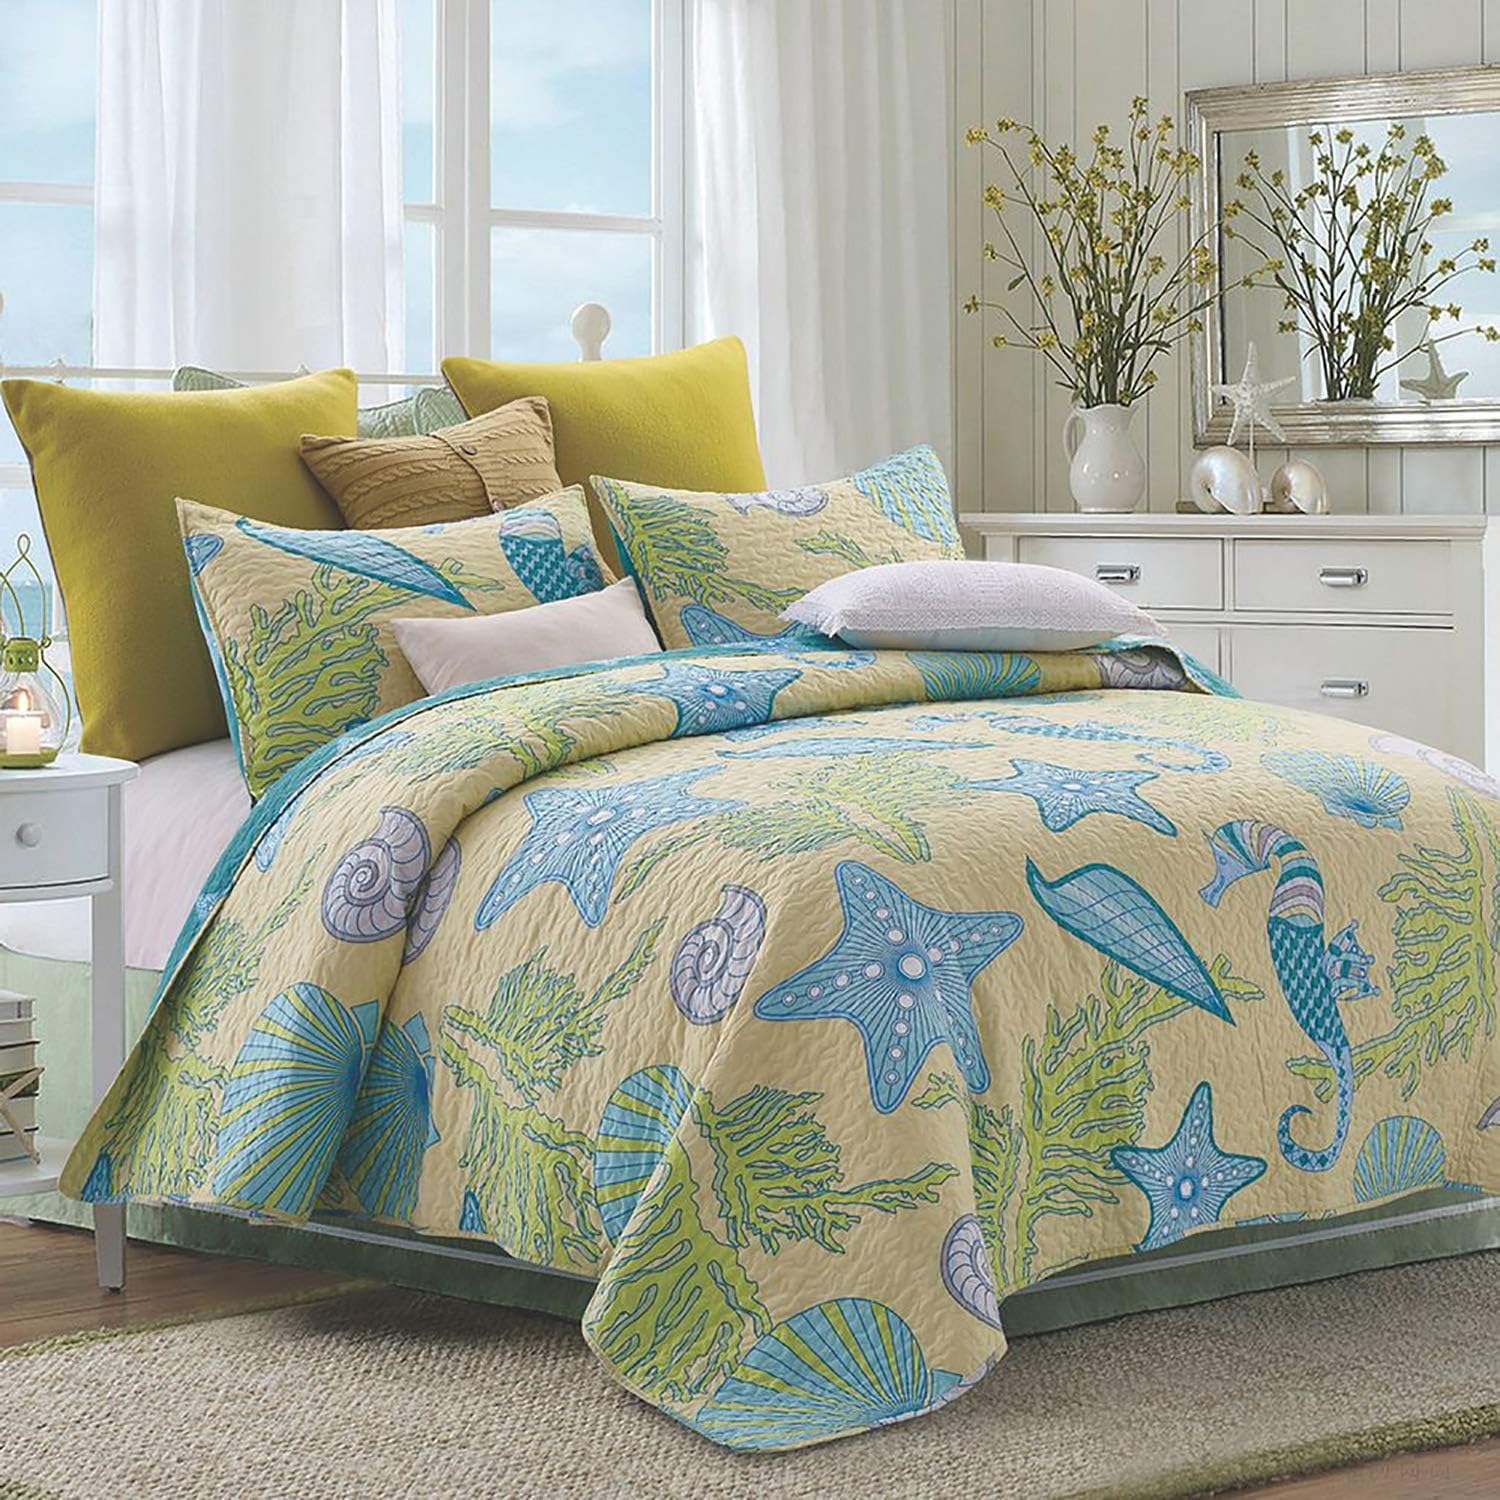 Virah Bella Quilt Bedding Set in King Beach Dreams Printed Lightweight Reversible Quilt with 2 Matching Pillow Shams - Cozy & Beautiful Coastal-Themed Bedding